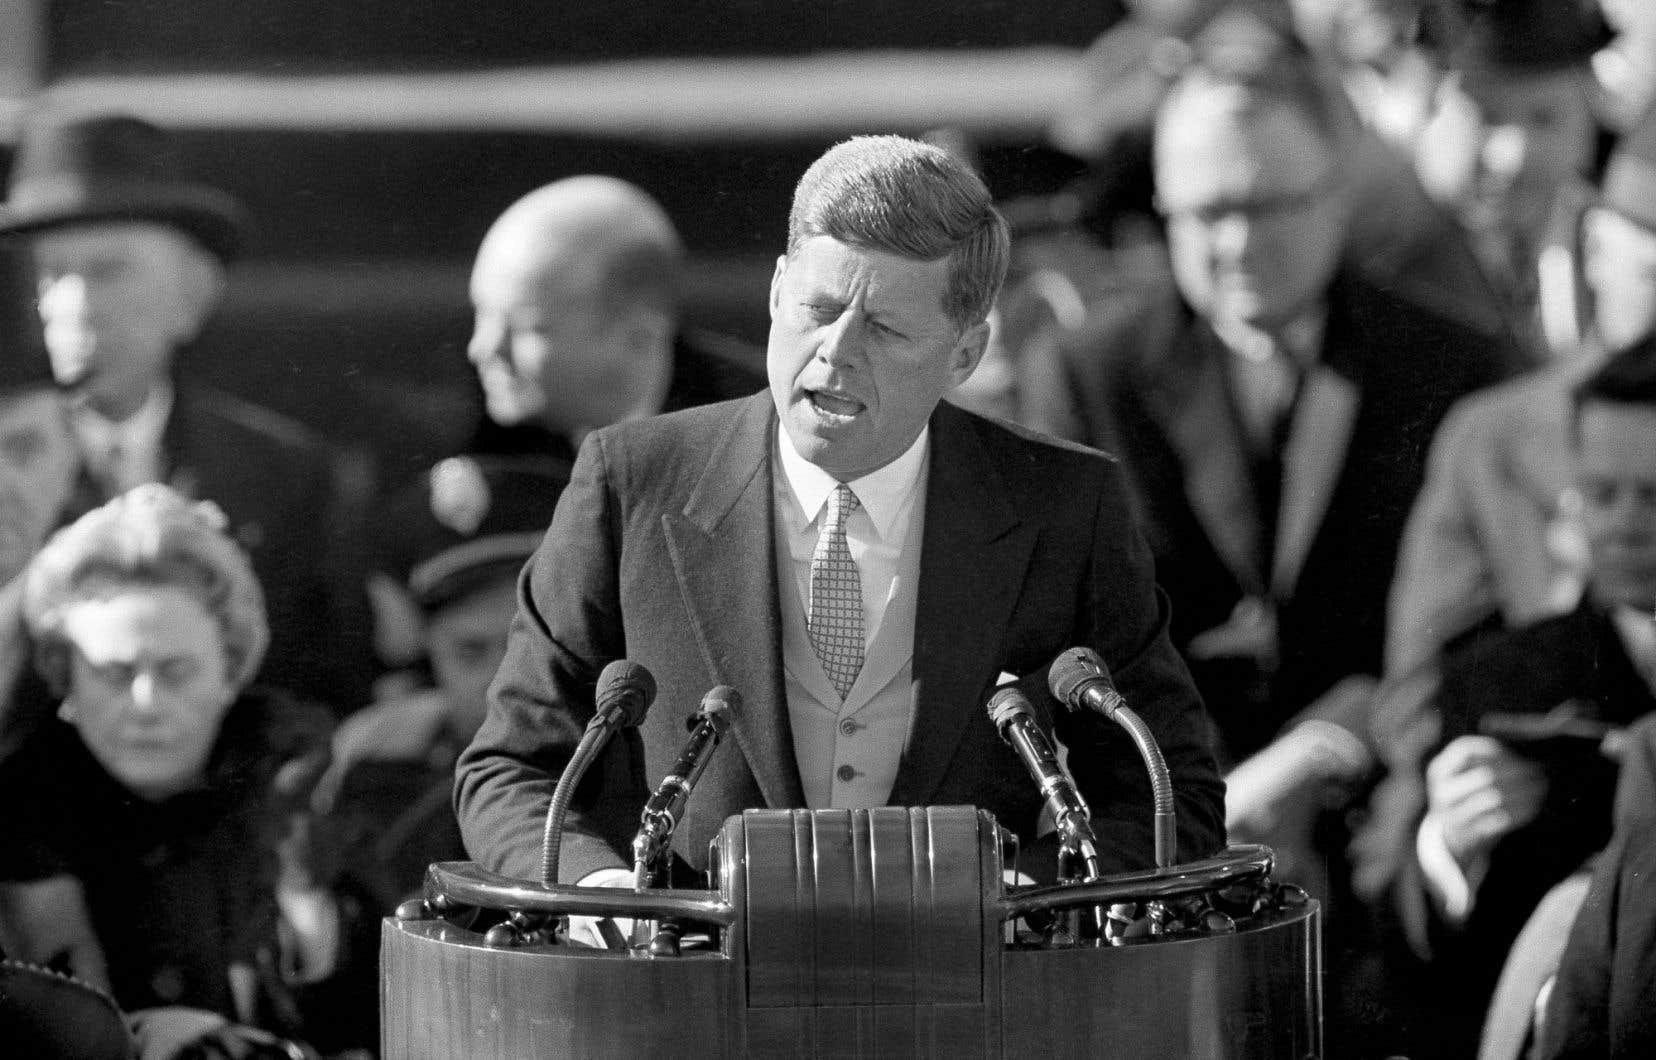 John Fitzgerald Kennedy becomes the 35th President of the United States on January 20, 1961.